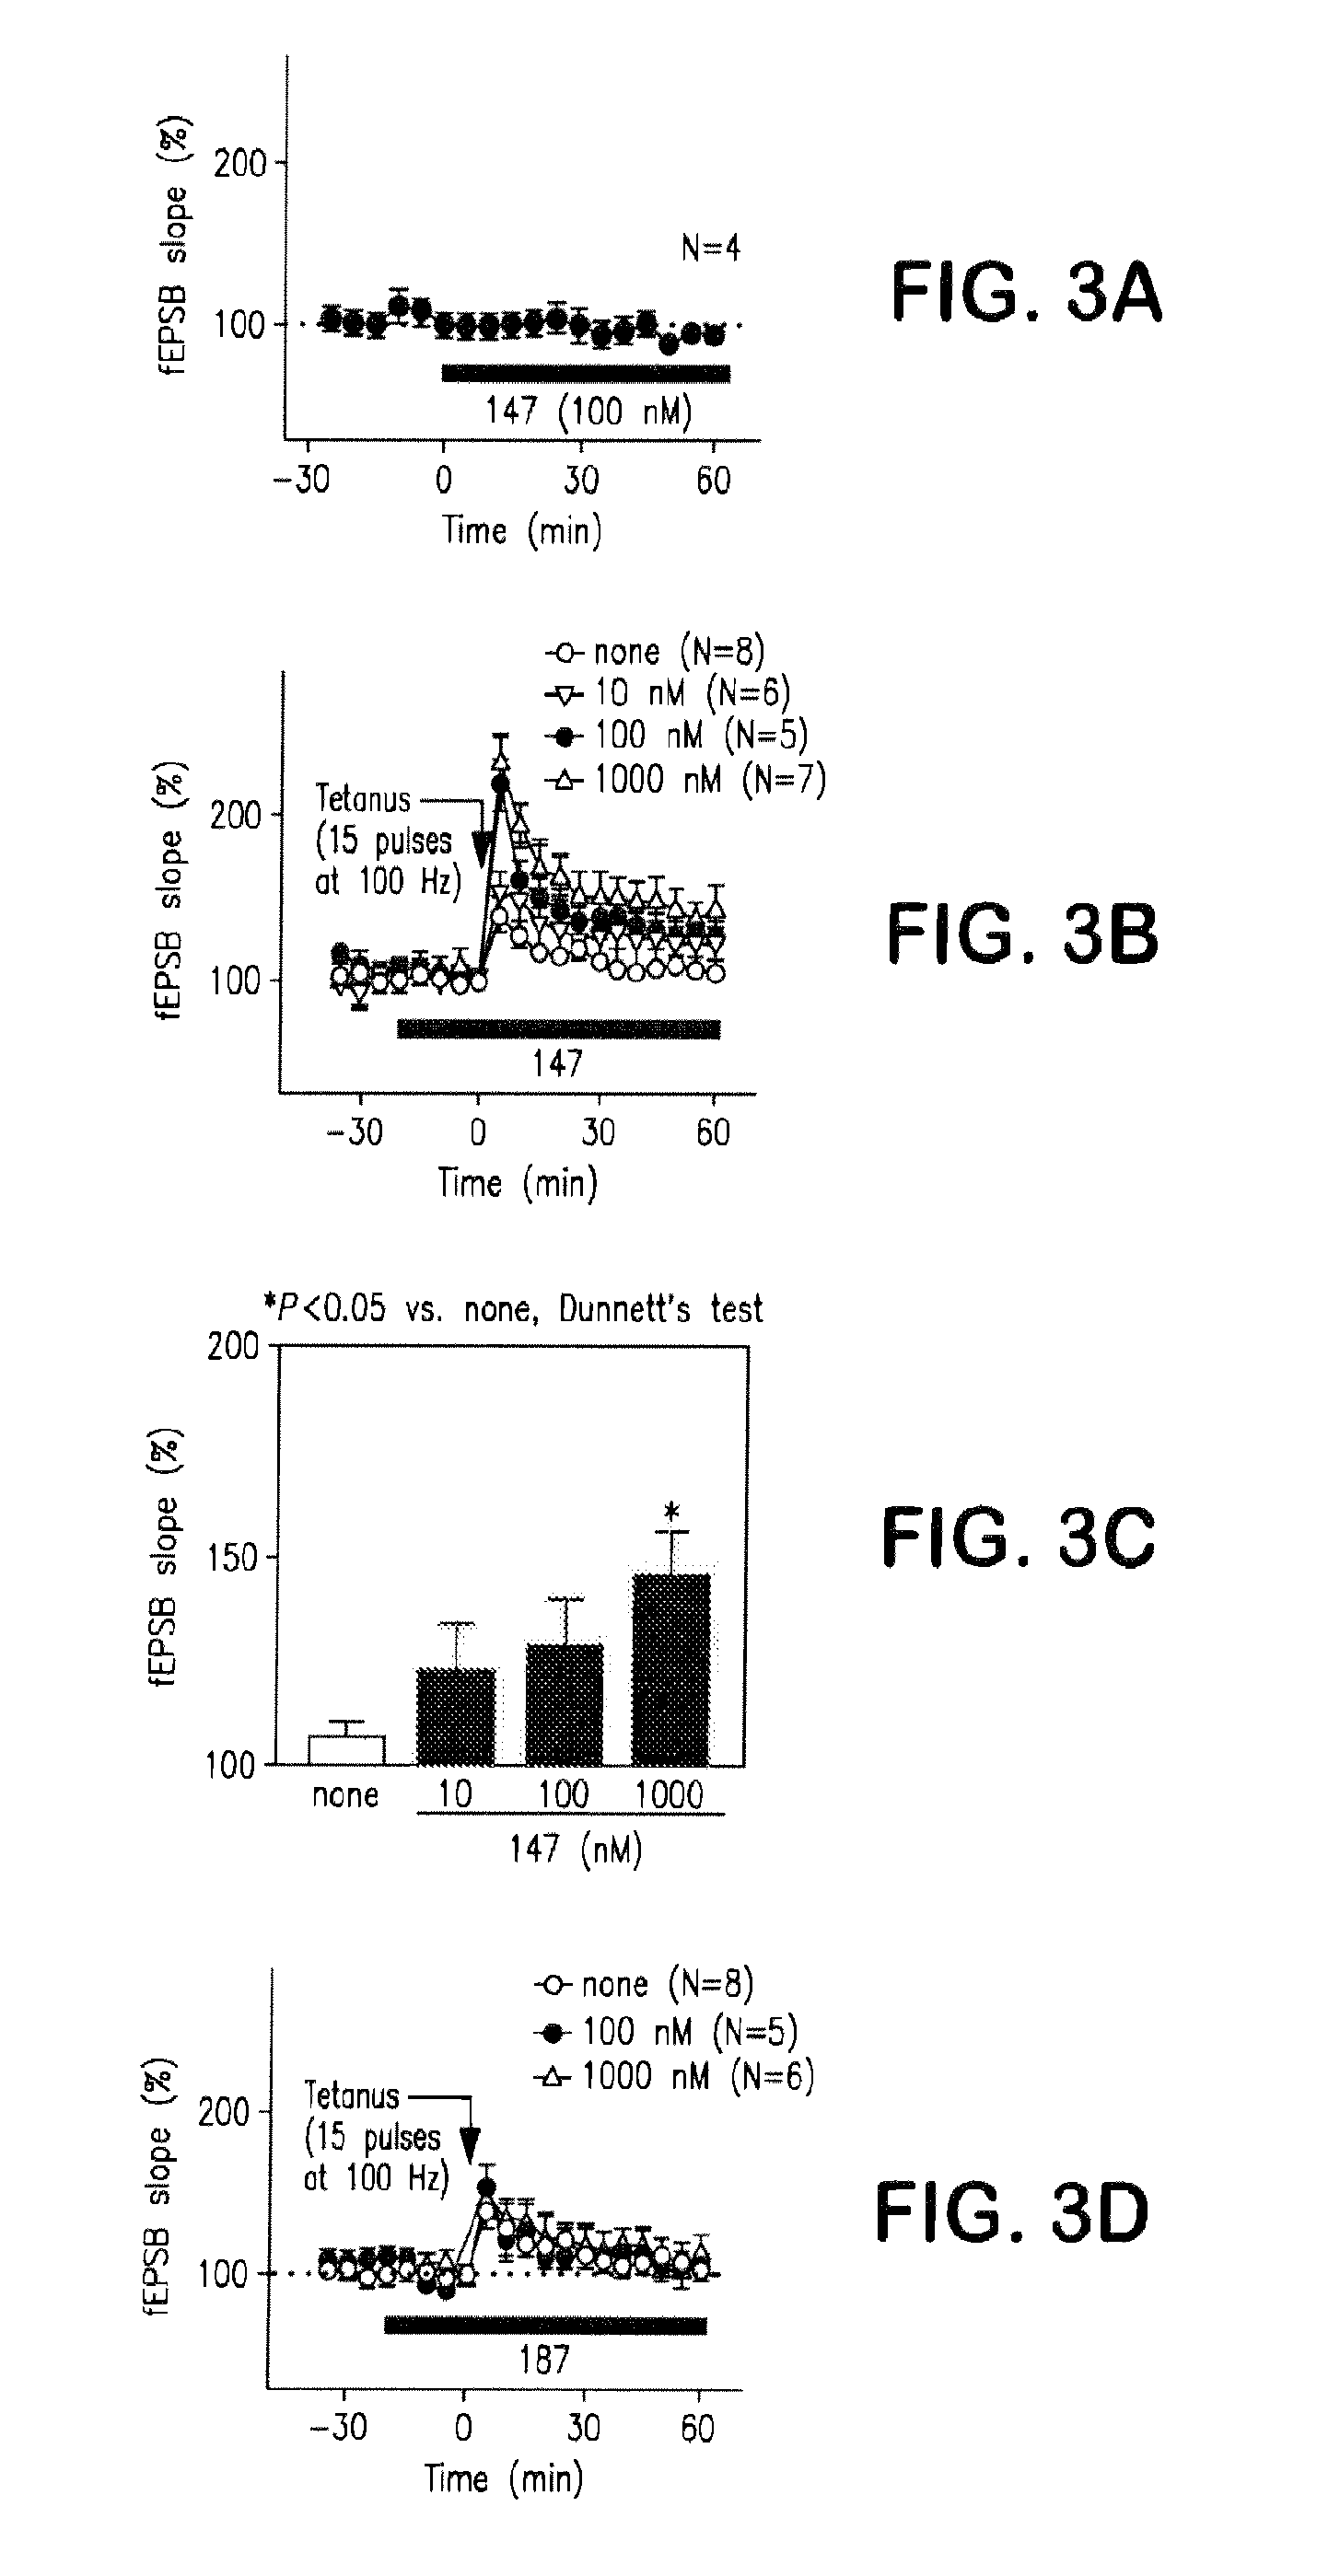 Methods for treating a variety of diseases and conditions, and compounds useful therefor